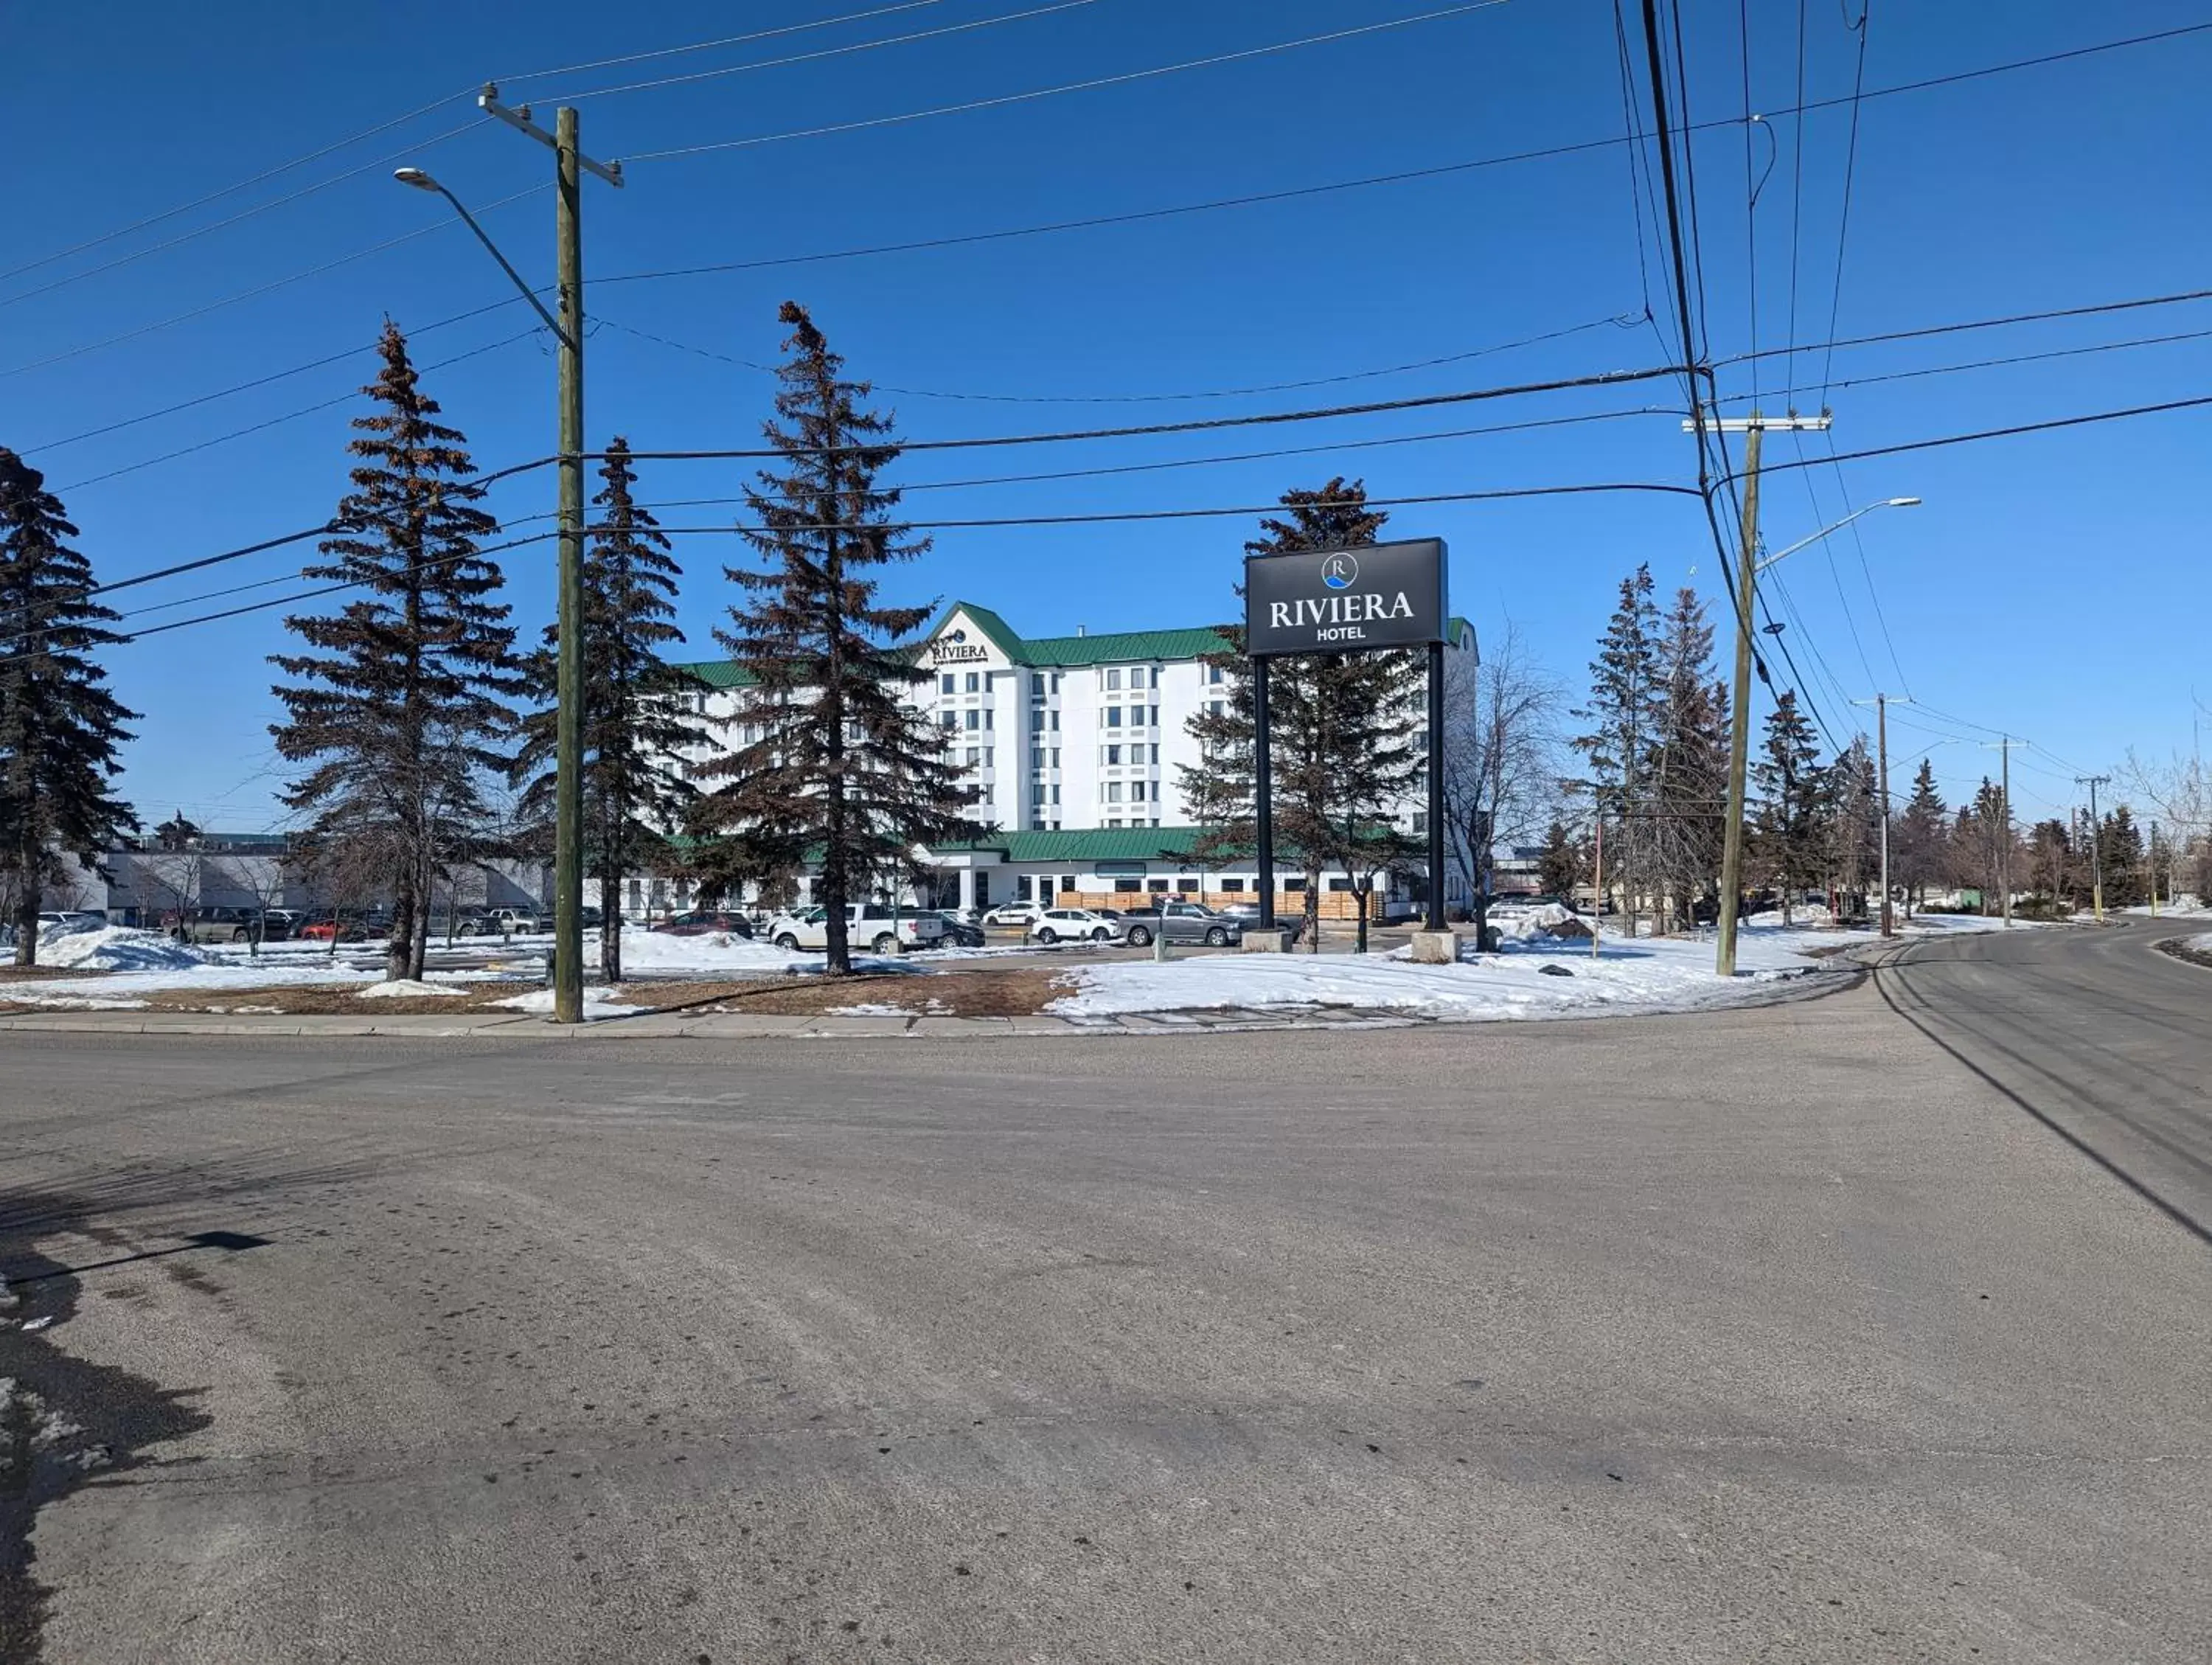 Property building, Winter in DIVYA SUTRA Riviera Plaza and Conference Centre Calgary Airport